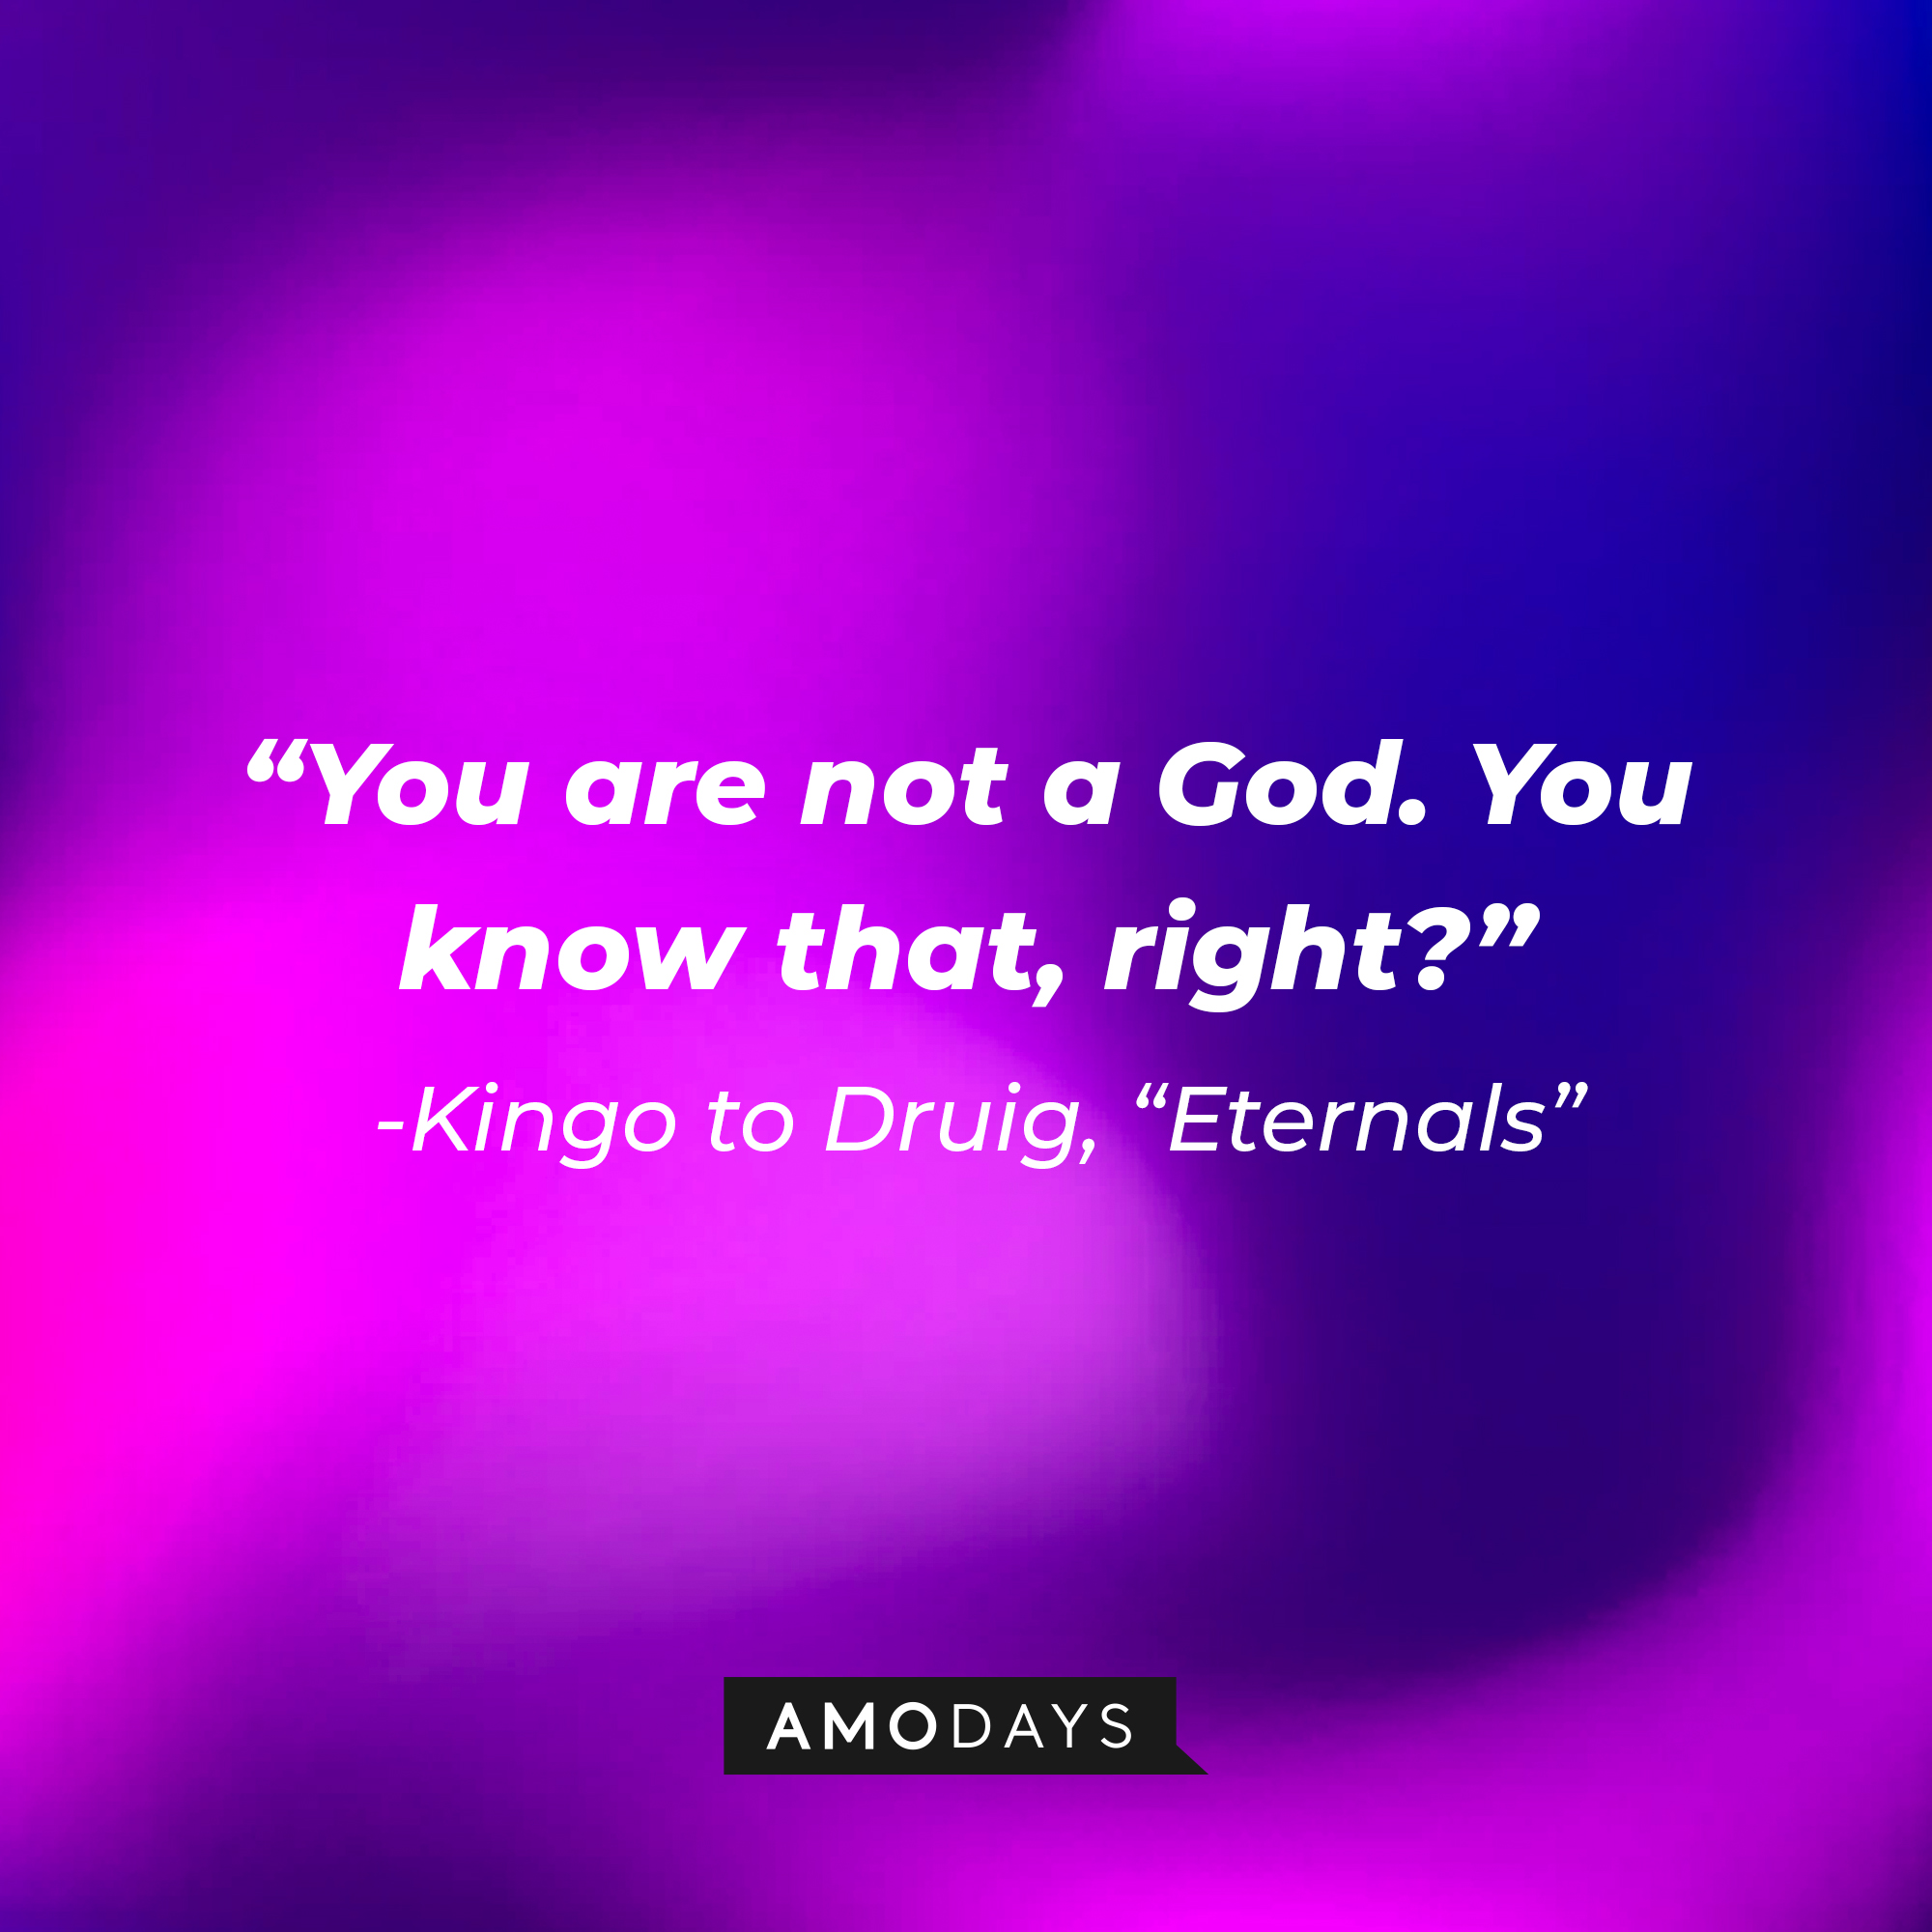 "You are not a God. You know that, right?" | Image: AmoDays